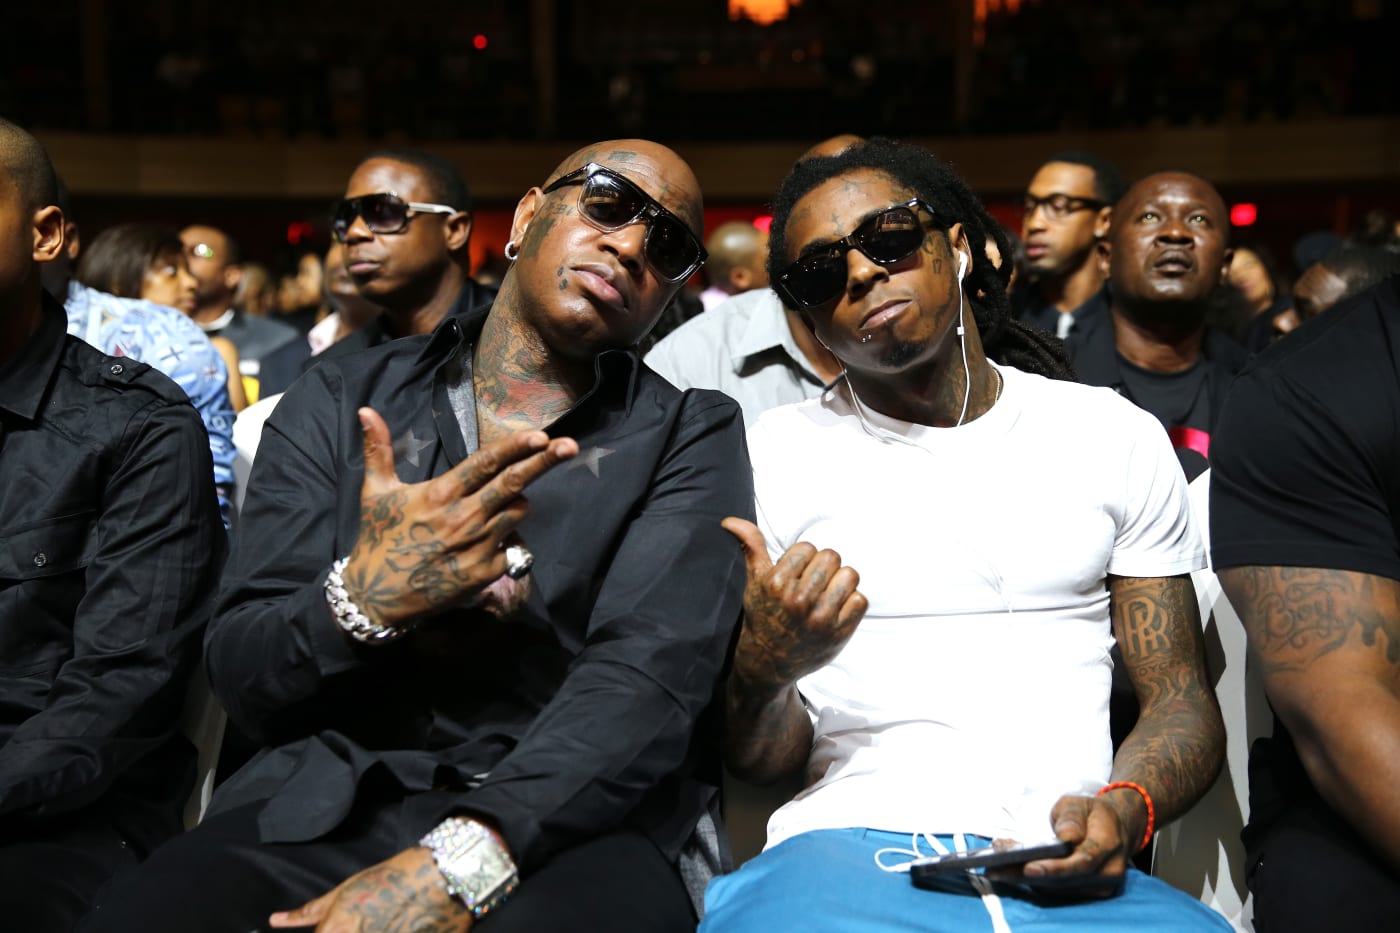 Lil Wayne's lawsuit against Universal has been put on hold until his dispute with Birdman is resolved.